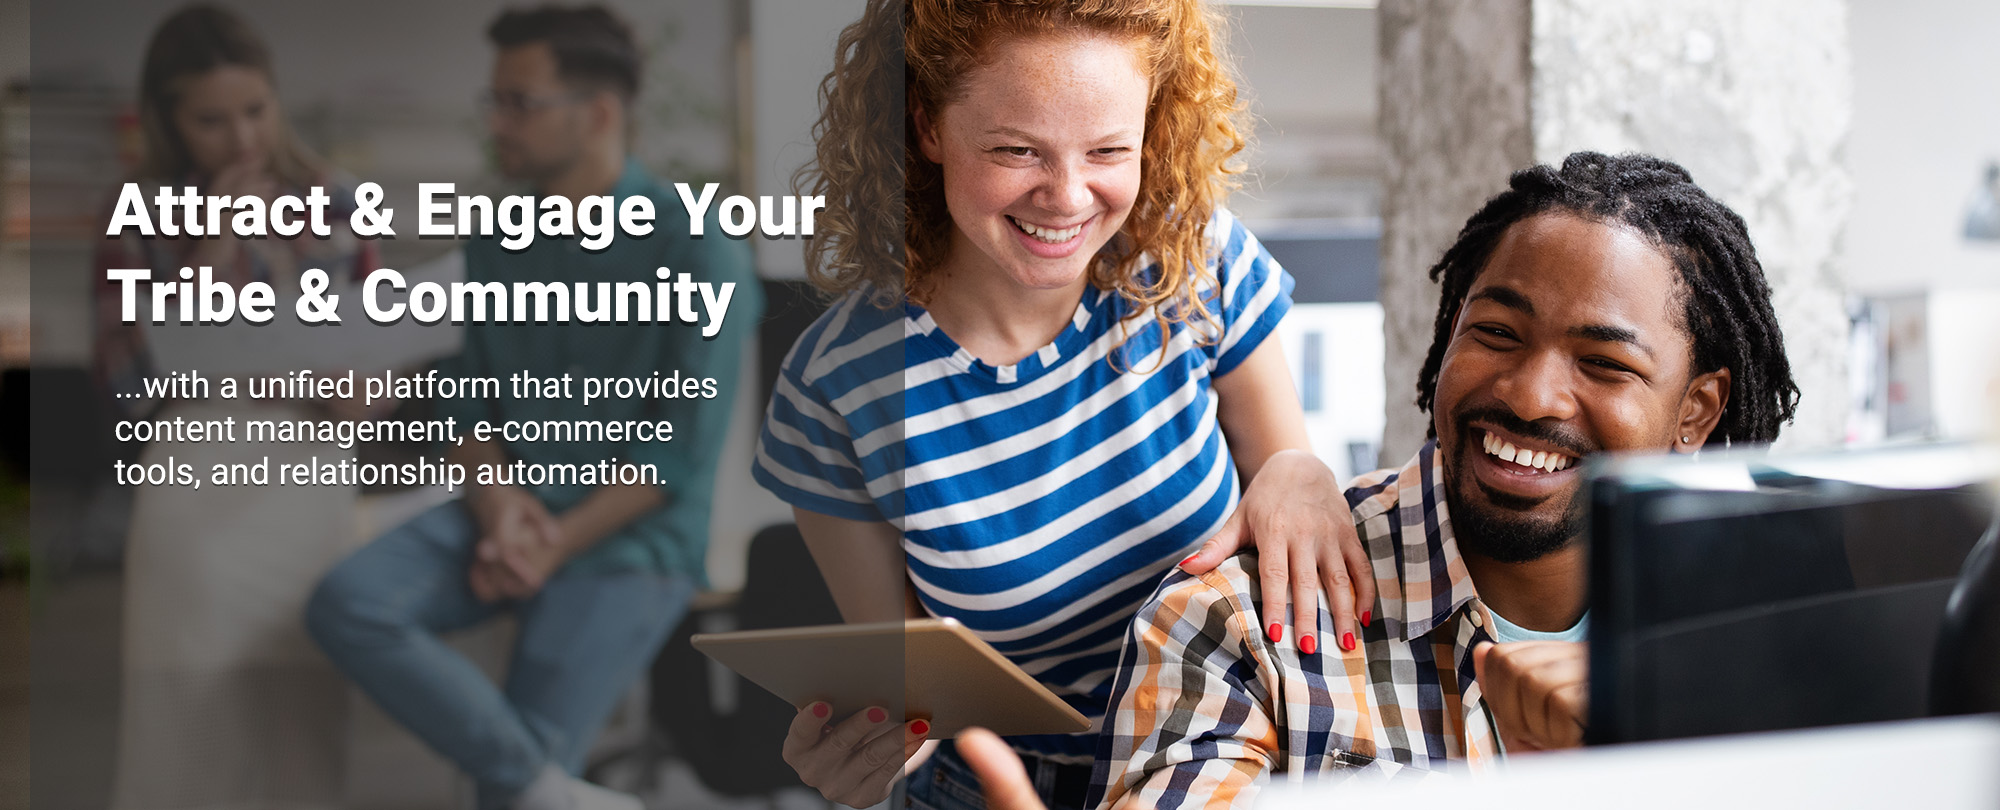 Attract and Engage Your Tribe and Community with a unified platform that provides content management, e-commerce tools, and relationship automation.